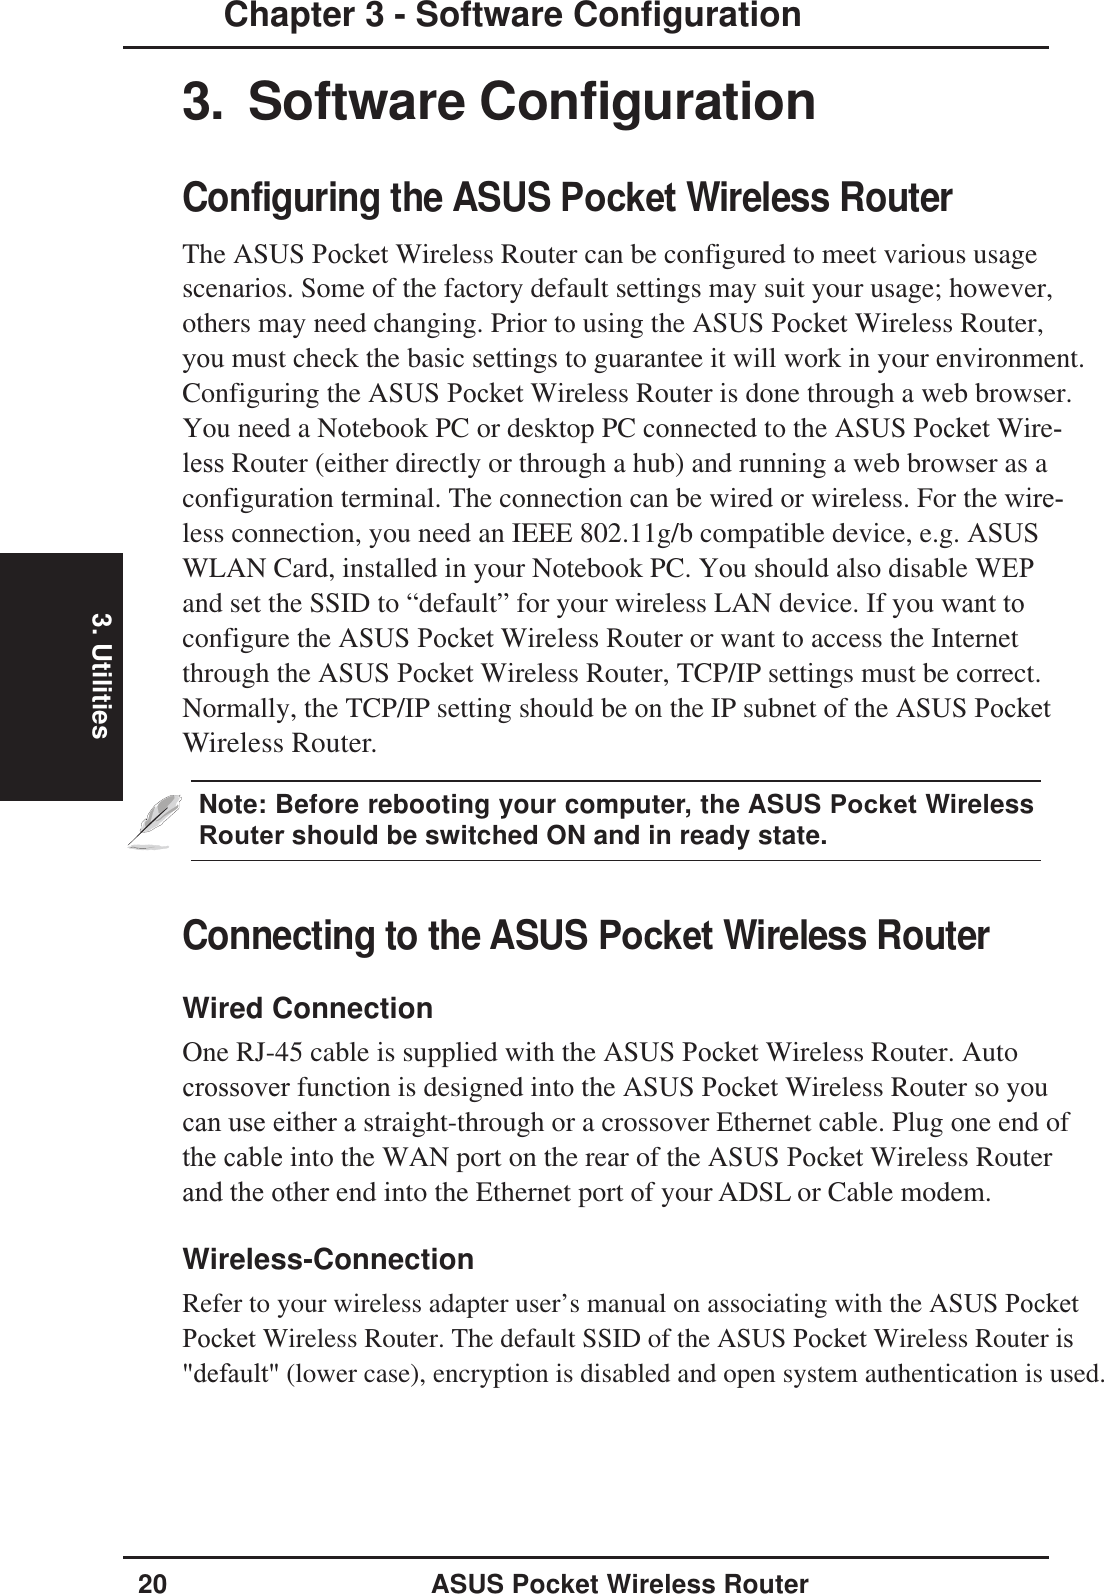 3. Utilities20 ASUS Pocket Wireless RouterChapter 3 - Software Configuration3. Software ConfigurationConfiguring the ASUS Pocket Wireless RouterThe ASUS Pocket Wireless Router can be configured to meet various usagescenarios. Some of the factory default settings may suit your usage; however,others may need changing. Prior to using the ASUS Pocket Wireless Router, you must check the basic settings to guarantee it will work in your environment.Configuring the ASUS Pocket Wireless Router is done through a web browser.You need a Notebook PC or desktop PC connected to the ASUS Pocket Wire-less Router (either directly or through a hub) and running a web browser as aconfiguration terminal. The connection can be wired or wireless. For the wire-less connection, you need an IEEE 802.11g/b compatible device, e.g. ASUSWLAN Card, installed in your Notebook PC. You should also disable WEPand set the SSID to “default” for your wireless LAN device. If you want to configure the ASUS Pocket Wireless Router or want to access the Internetthrough the ASUS Pocket Wireless Router, TCP/IP settings must be correct.Normally, the TCP/IP setting should be on the IP subnet of the ASUS Pocket Wireless Router.Note: Before rebooting your computer, the ASUS Pocket WirelessRouter should be switched ON and in ready state.Connecting to the ASUS Pocket Wireless RouterWired ConnectionOne RJ-45 cable is supplied with the ASUS Pocket Wireless Router. Auto crossover function is designed into the ASUS Pocket Wireless Router so you can use either a straight-through or a crossover Ethernet cable. Plug one end ofthe cable into the WAN port on the rear of the ASUS Pocket Wireless Router and the other end into the Ethernet port of your ADSL or Cable modem.Wireless-ConnectionRefer to your wireless adapter user’s manual on associating with the ASUS Pocket Pocket Wireless Router. The default SSID of the ASUS Pocket Wireless Router is&quot;default&quot; (lower case), encryption is disabled and open system authentication is used.